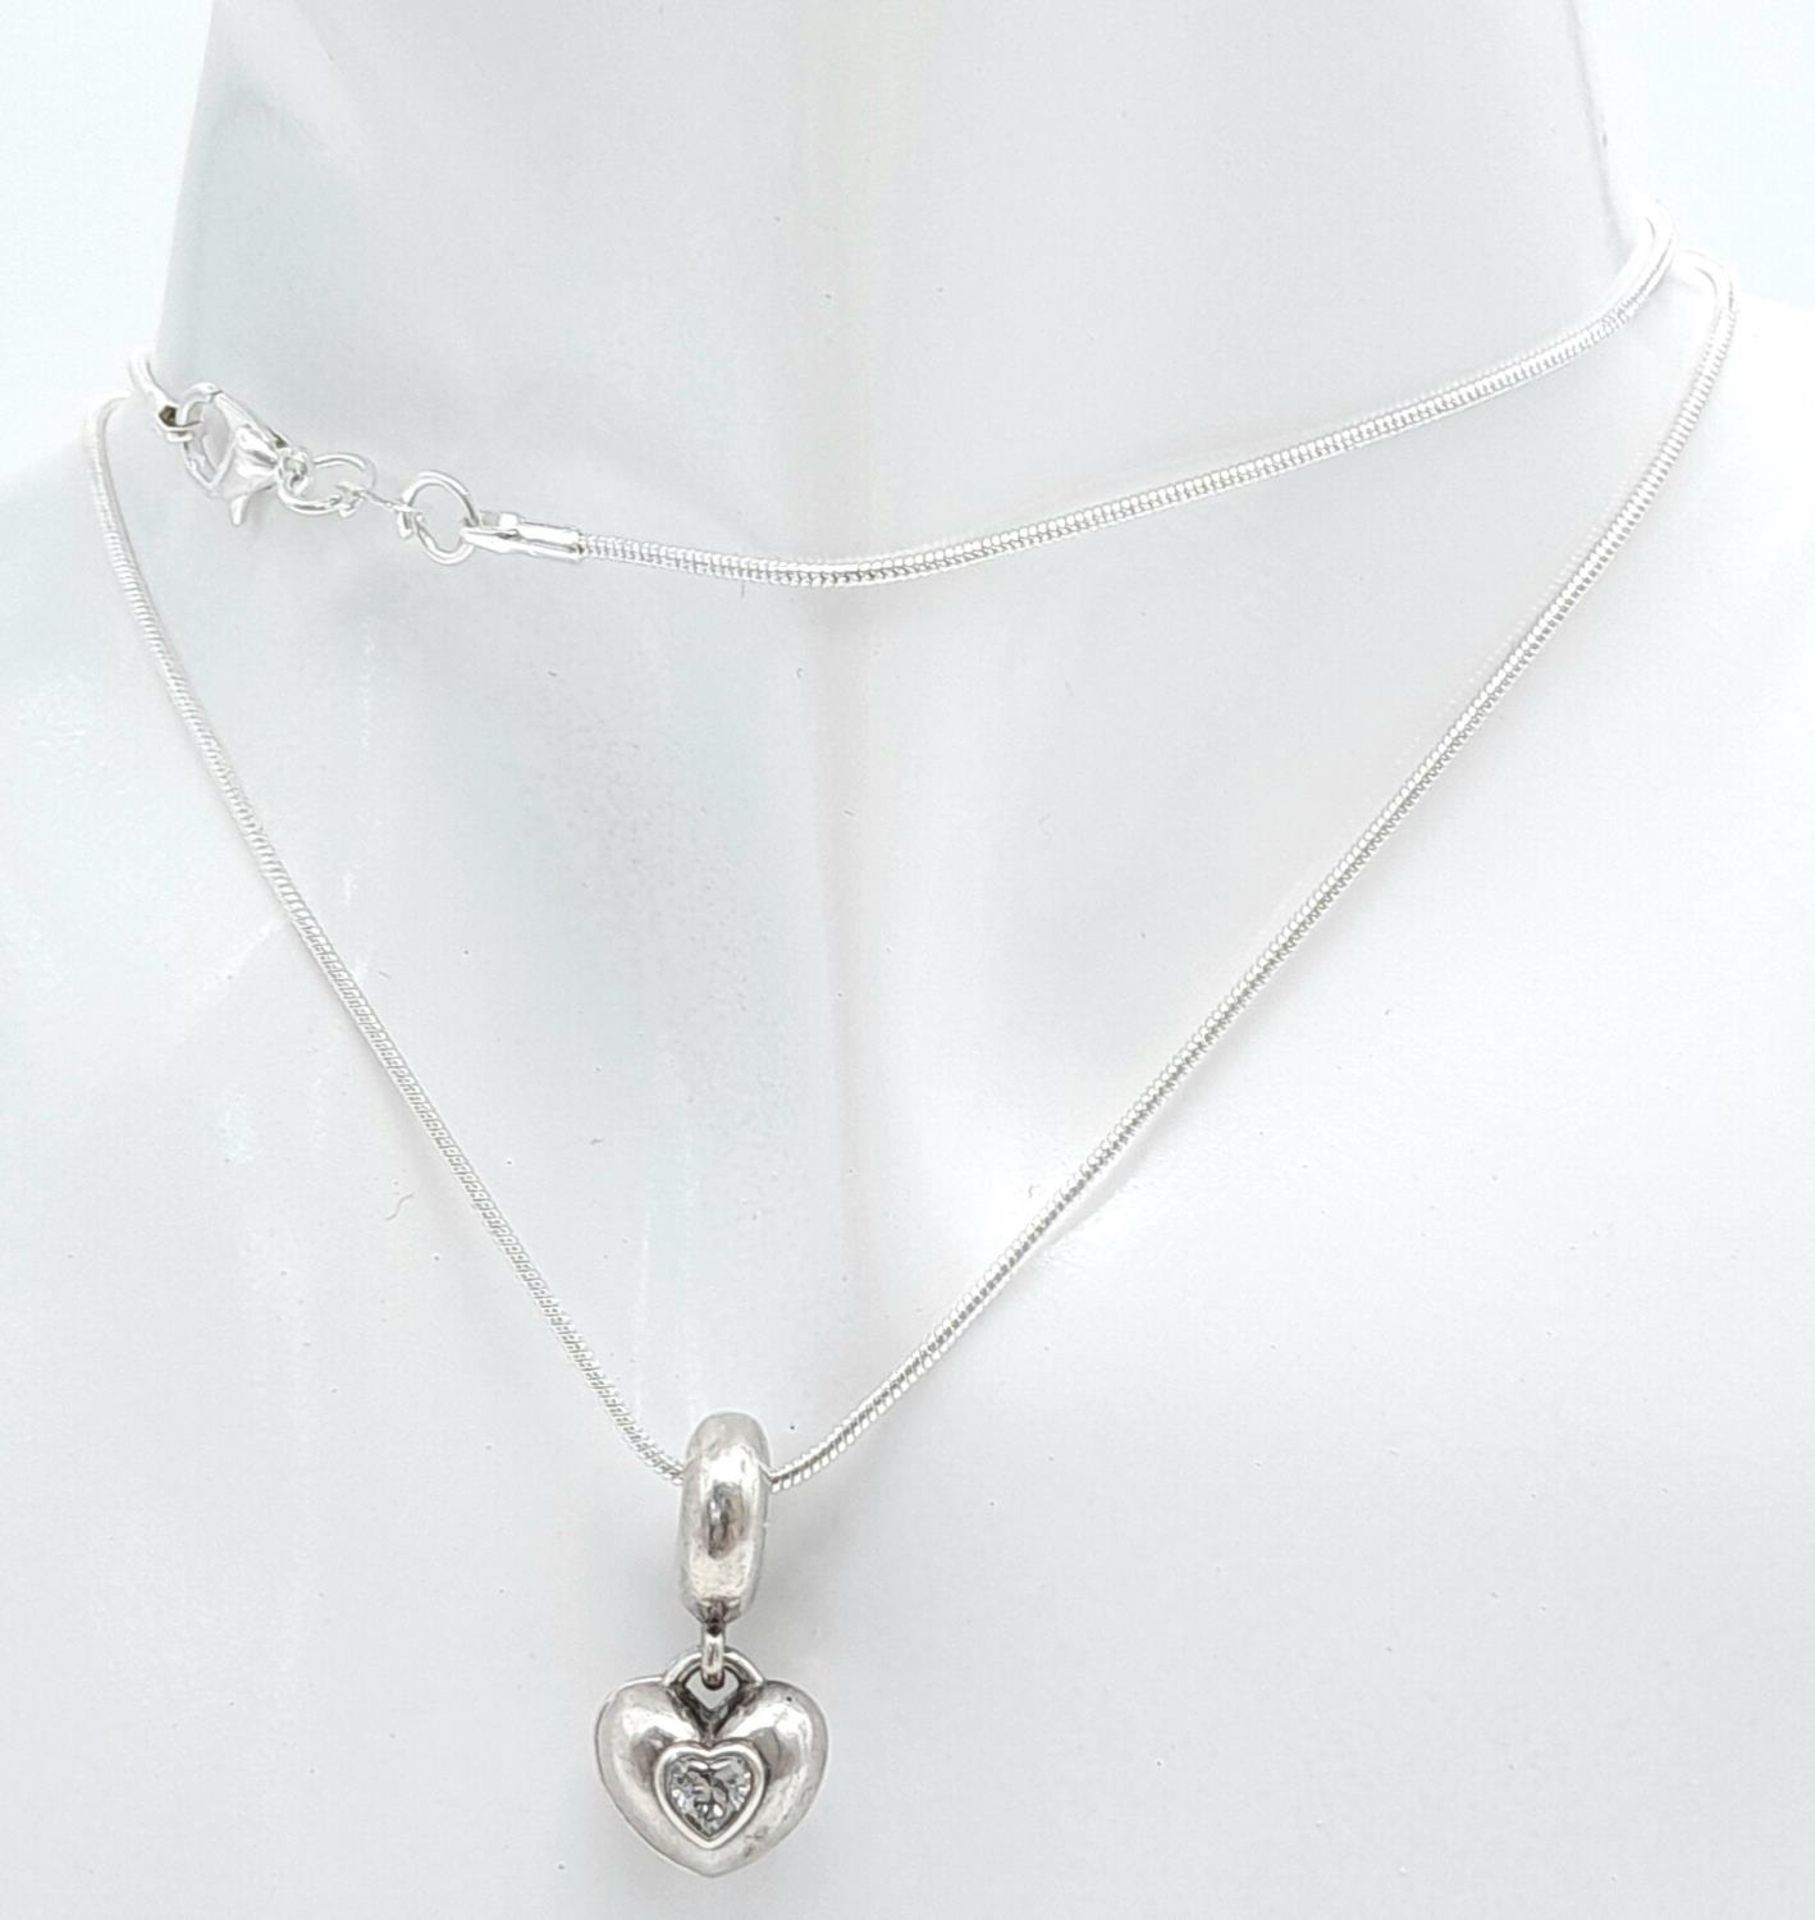 A 925 Silver Pandora Pendant on Snake Chain Necklace. 2.2cm pendant, 56cm necklace, 10.91g total - Image 3 of 7